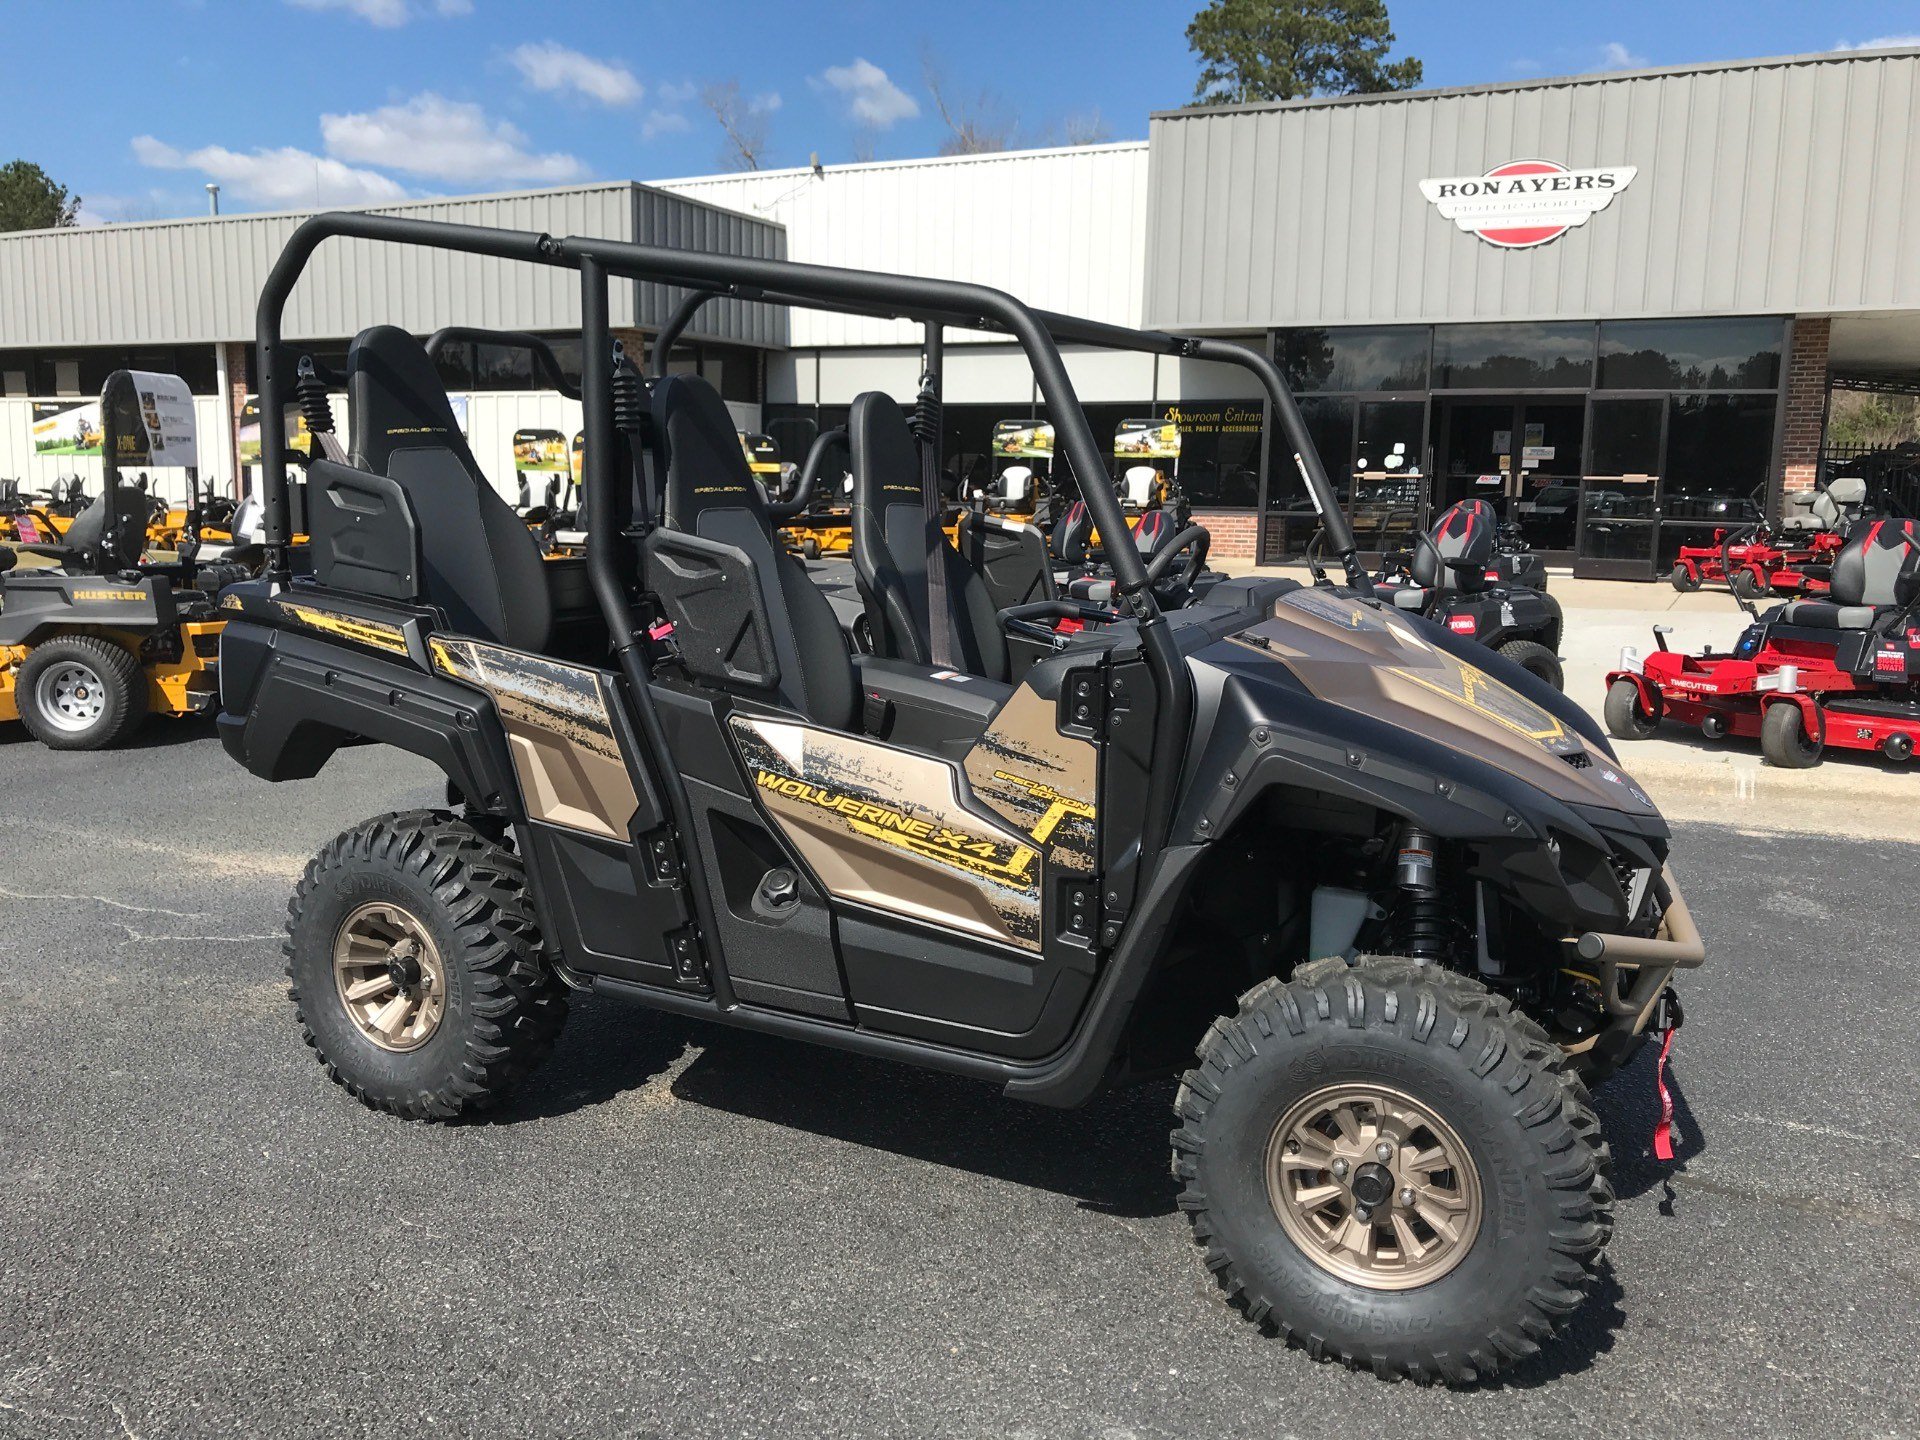 New 2020 Yamaha Wolverine X4 XTR 850 Utility Vehicles in Greenville